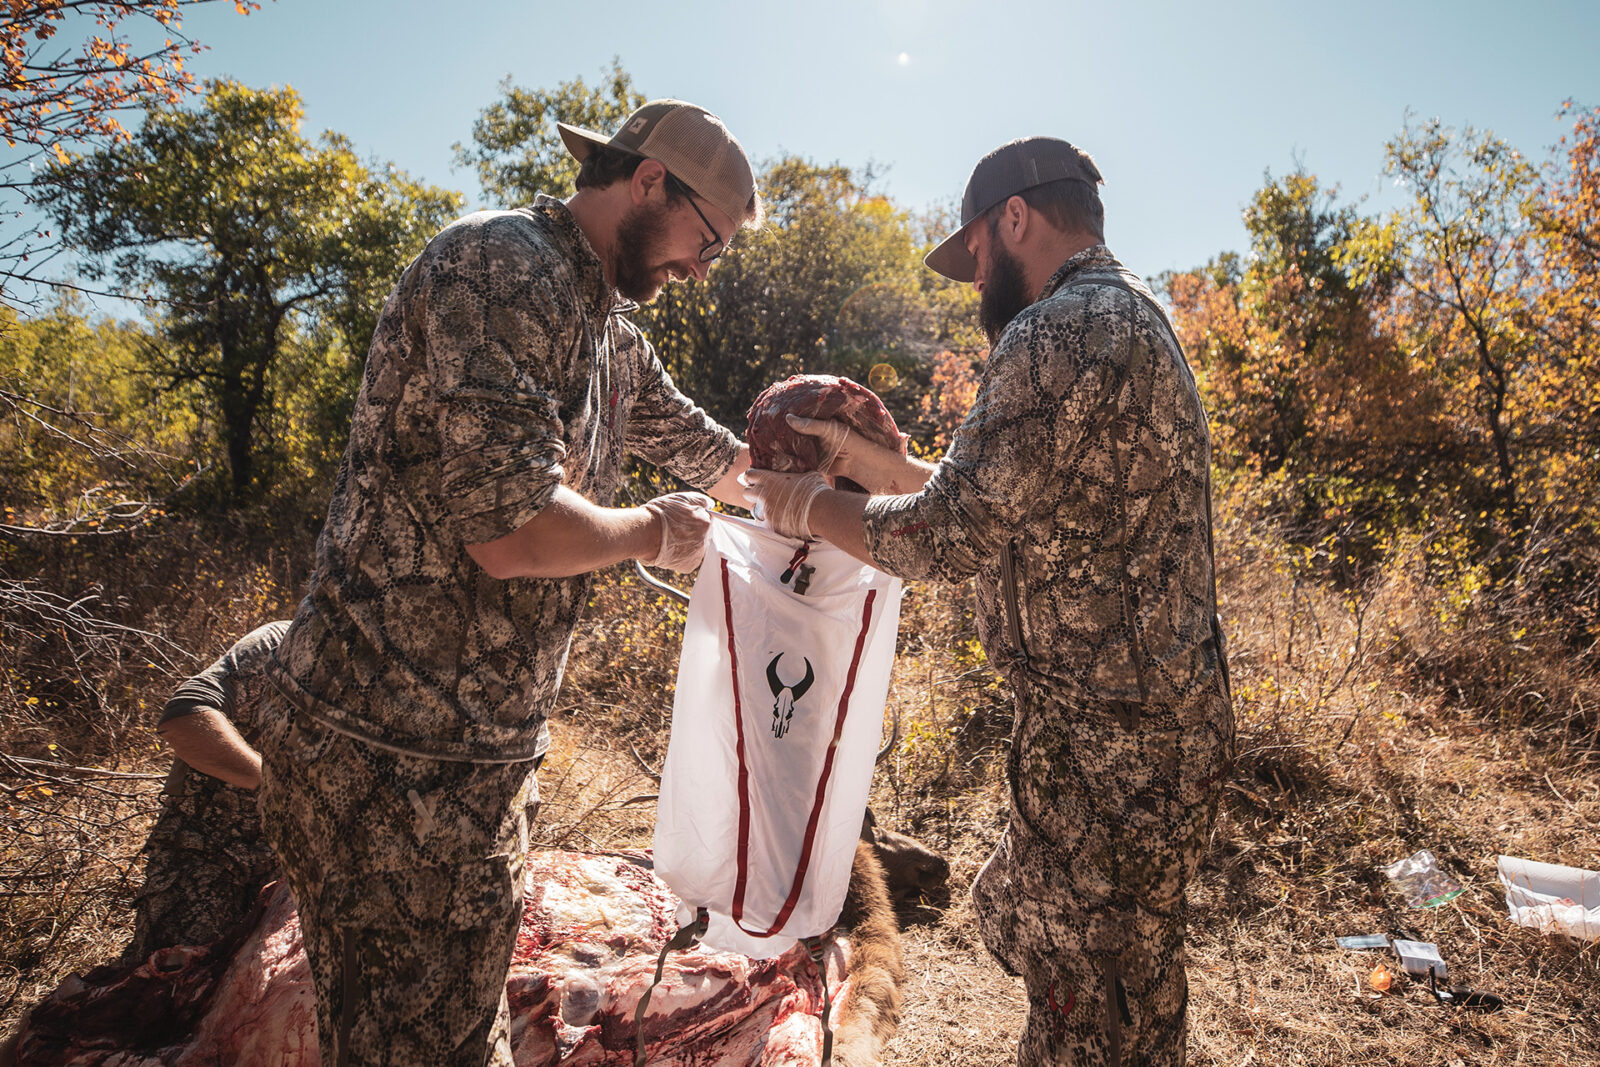 Two backcountry hunters place wild game into a game bag while field dressing their harvest.